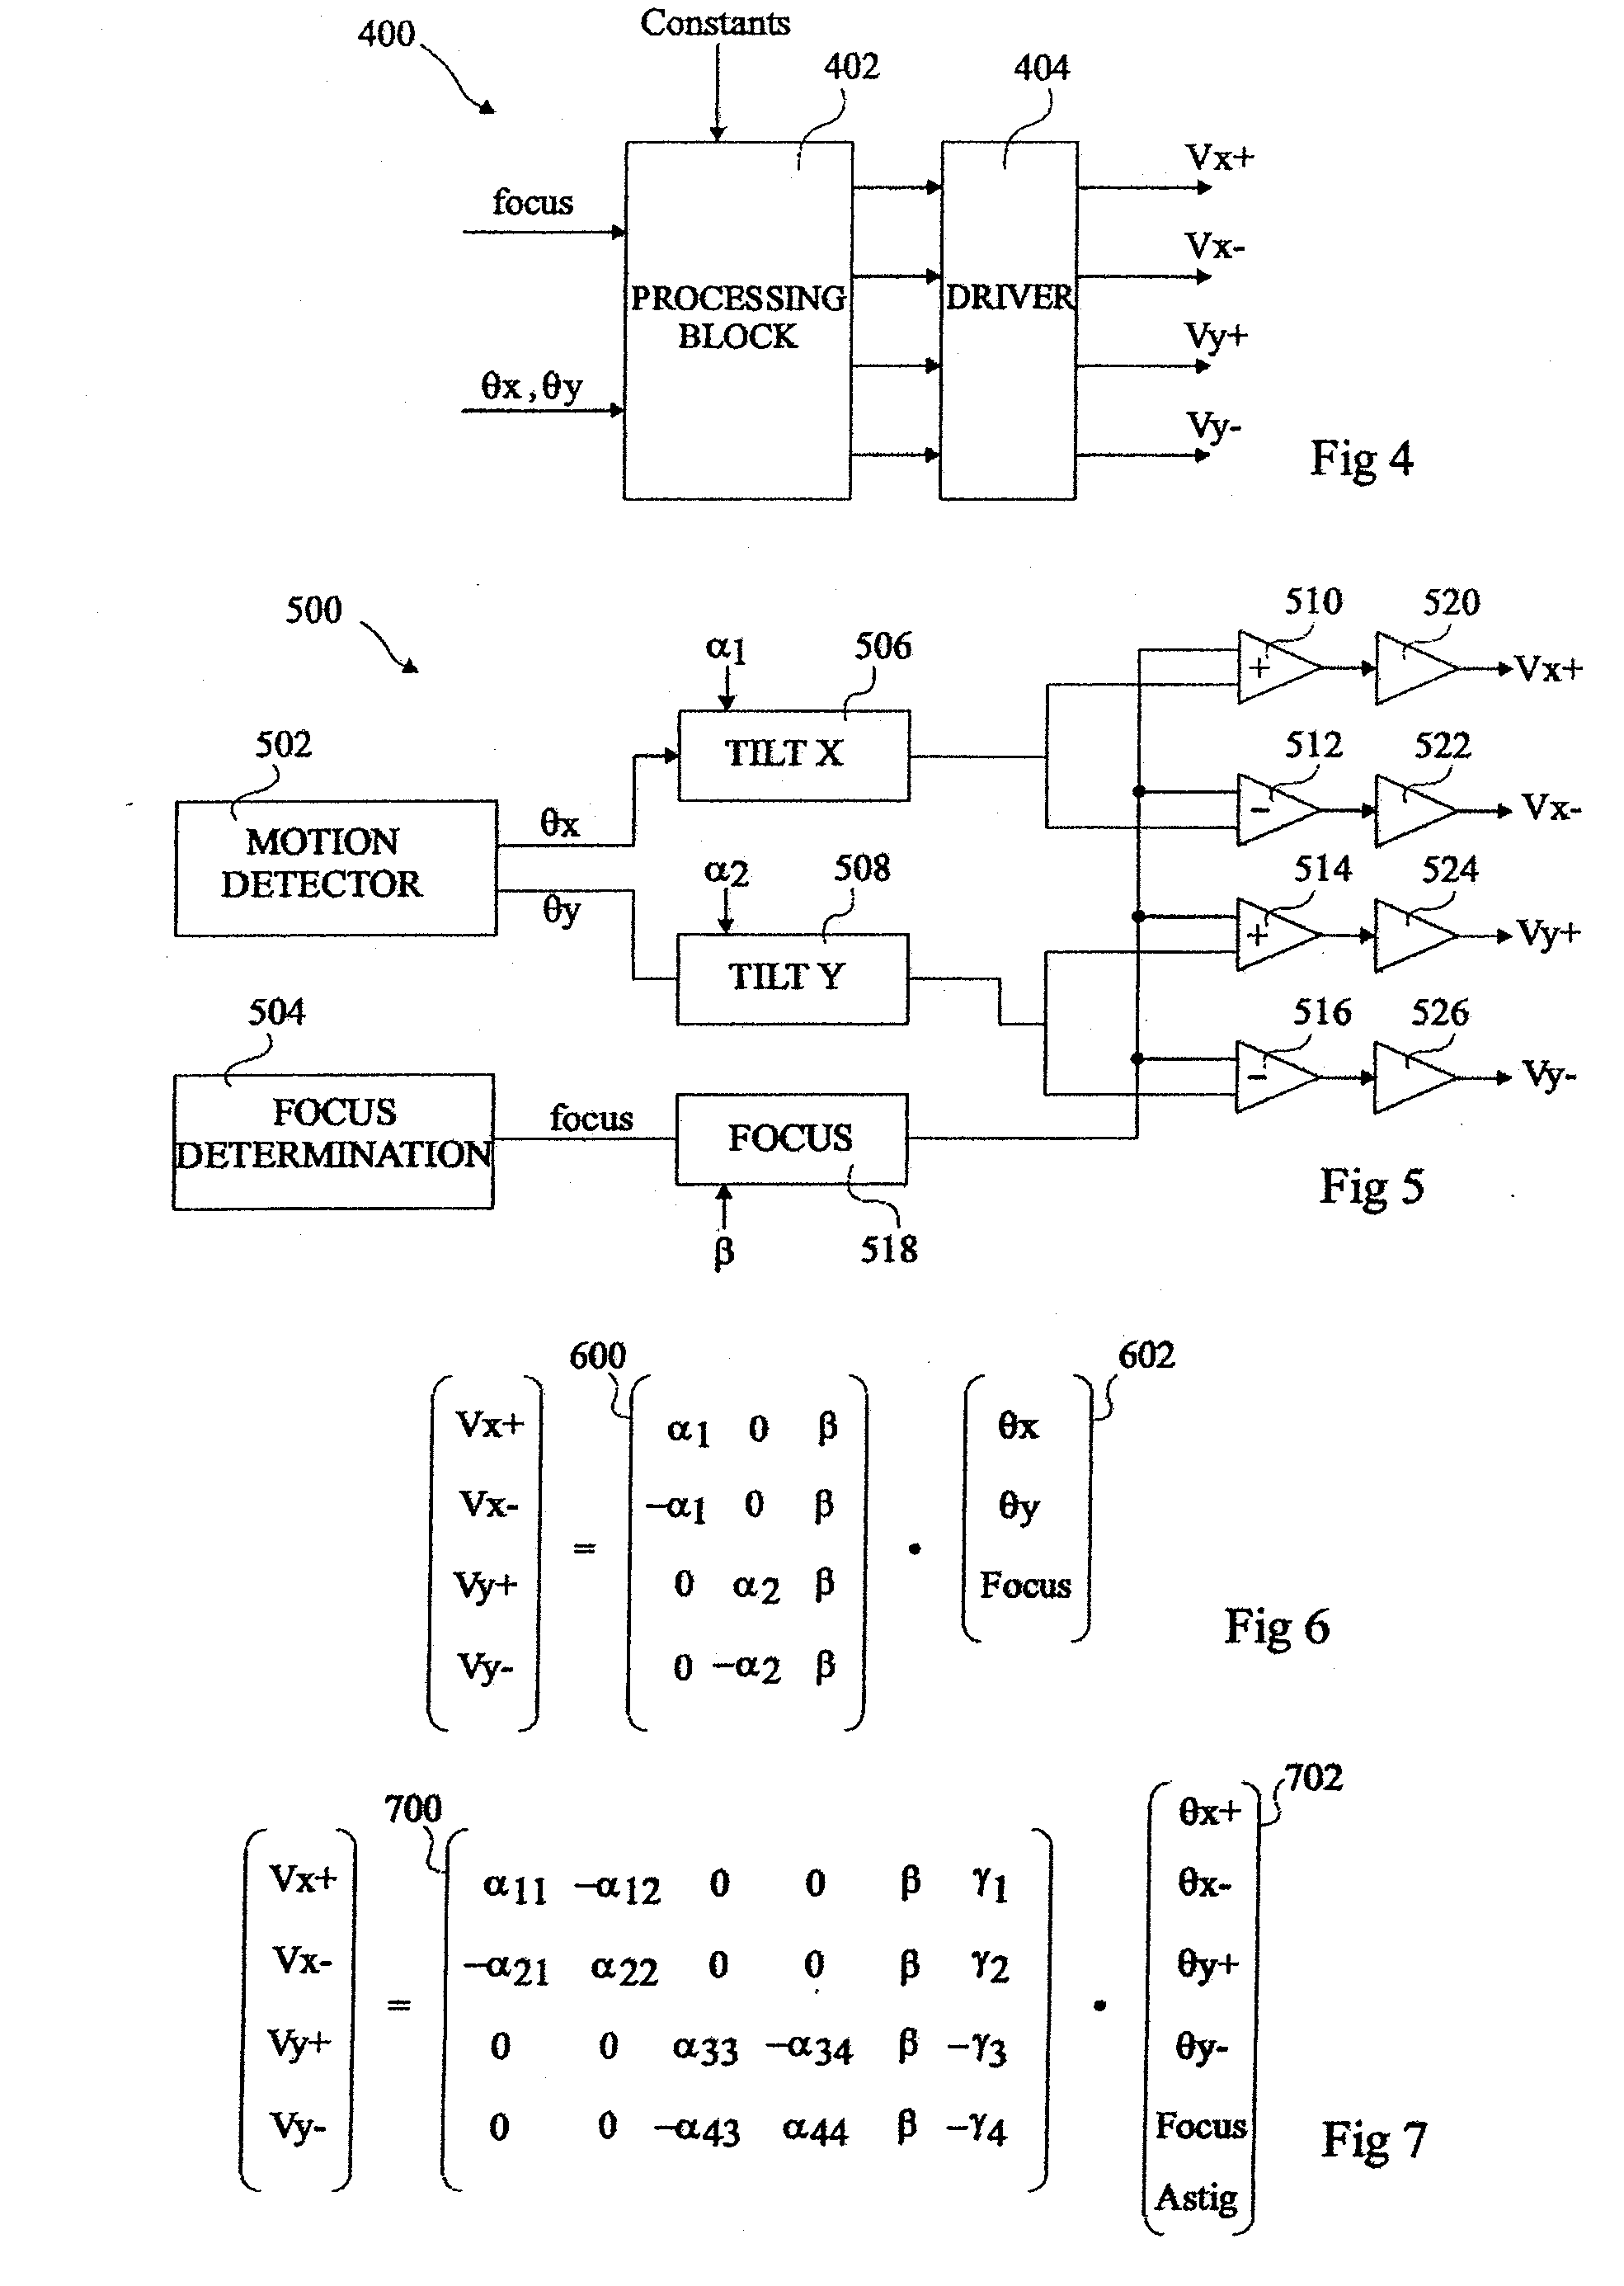 Image stabilization circuitry for liquid lens